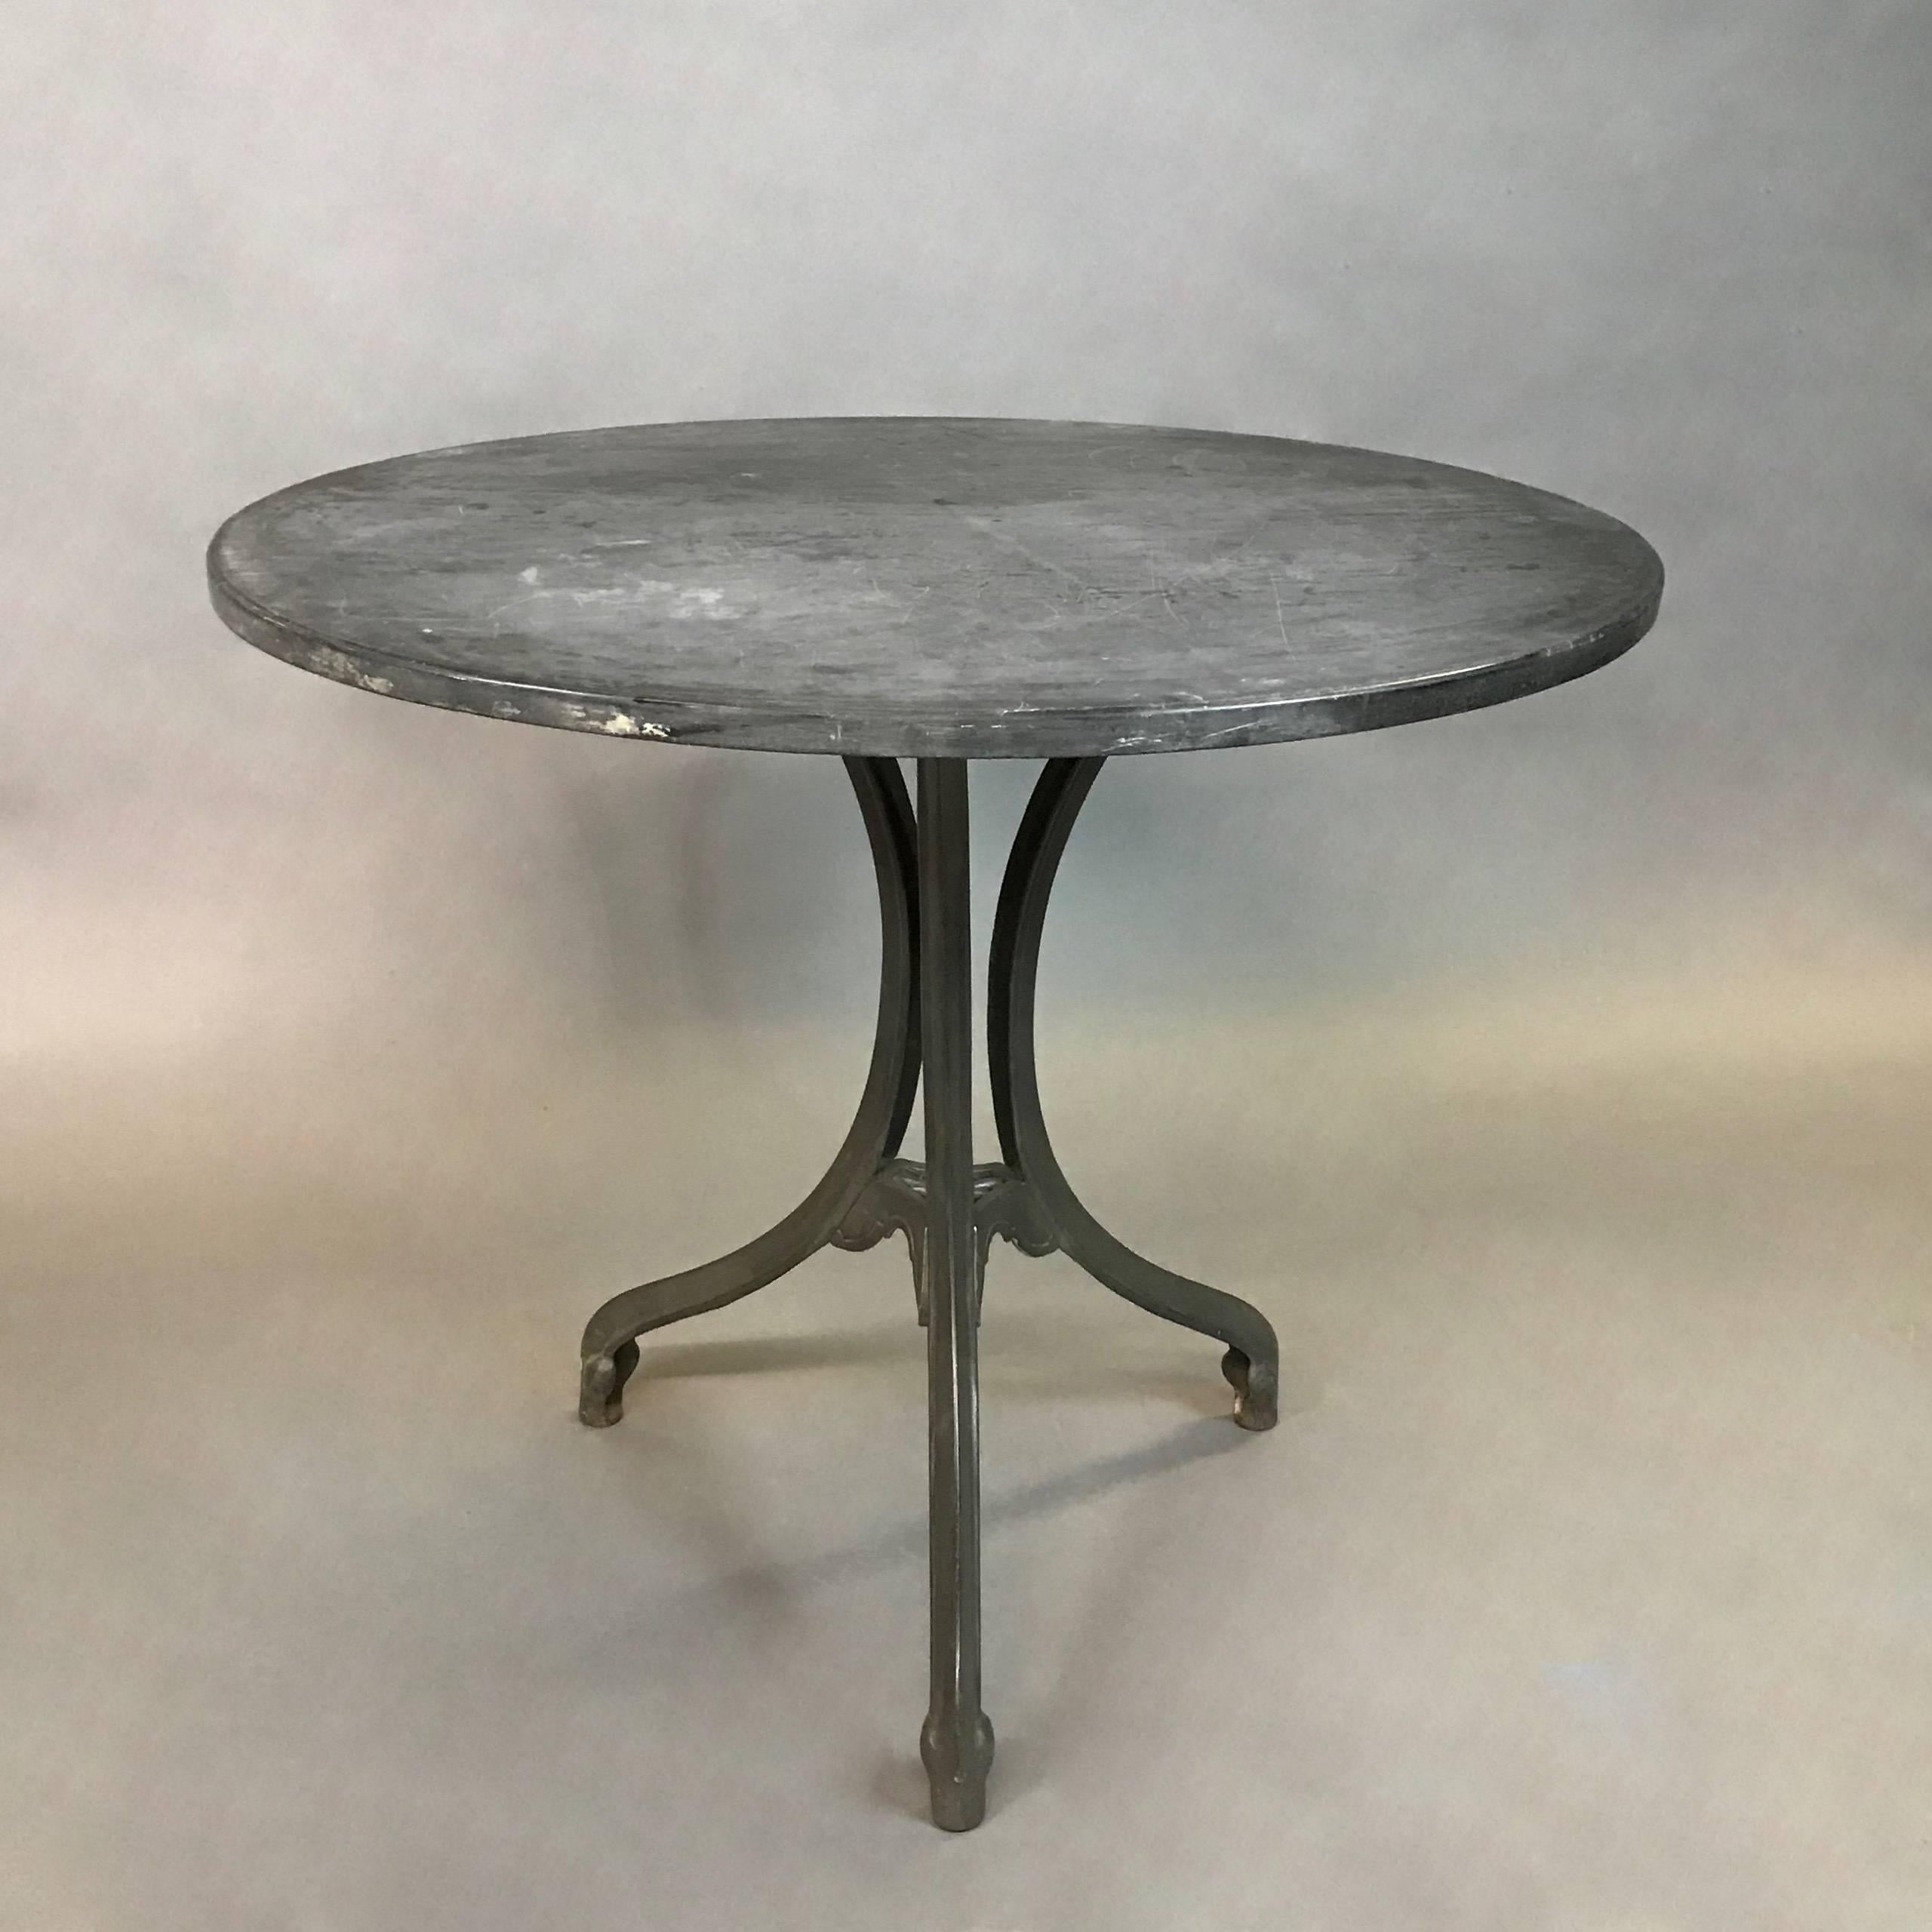 Art Deco, café, bistro, dining table features an oval shape, black slate top with an elegant, three prong, cast iron, pedestal base.